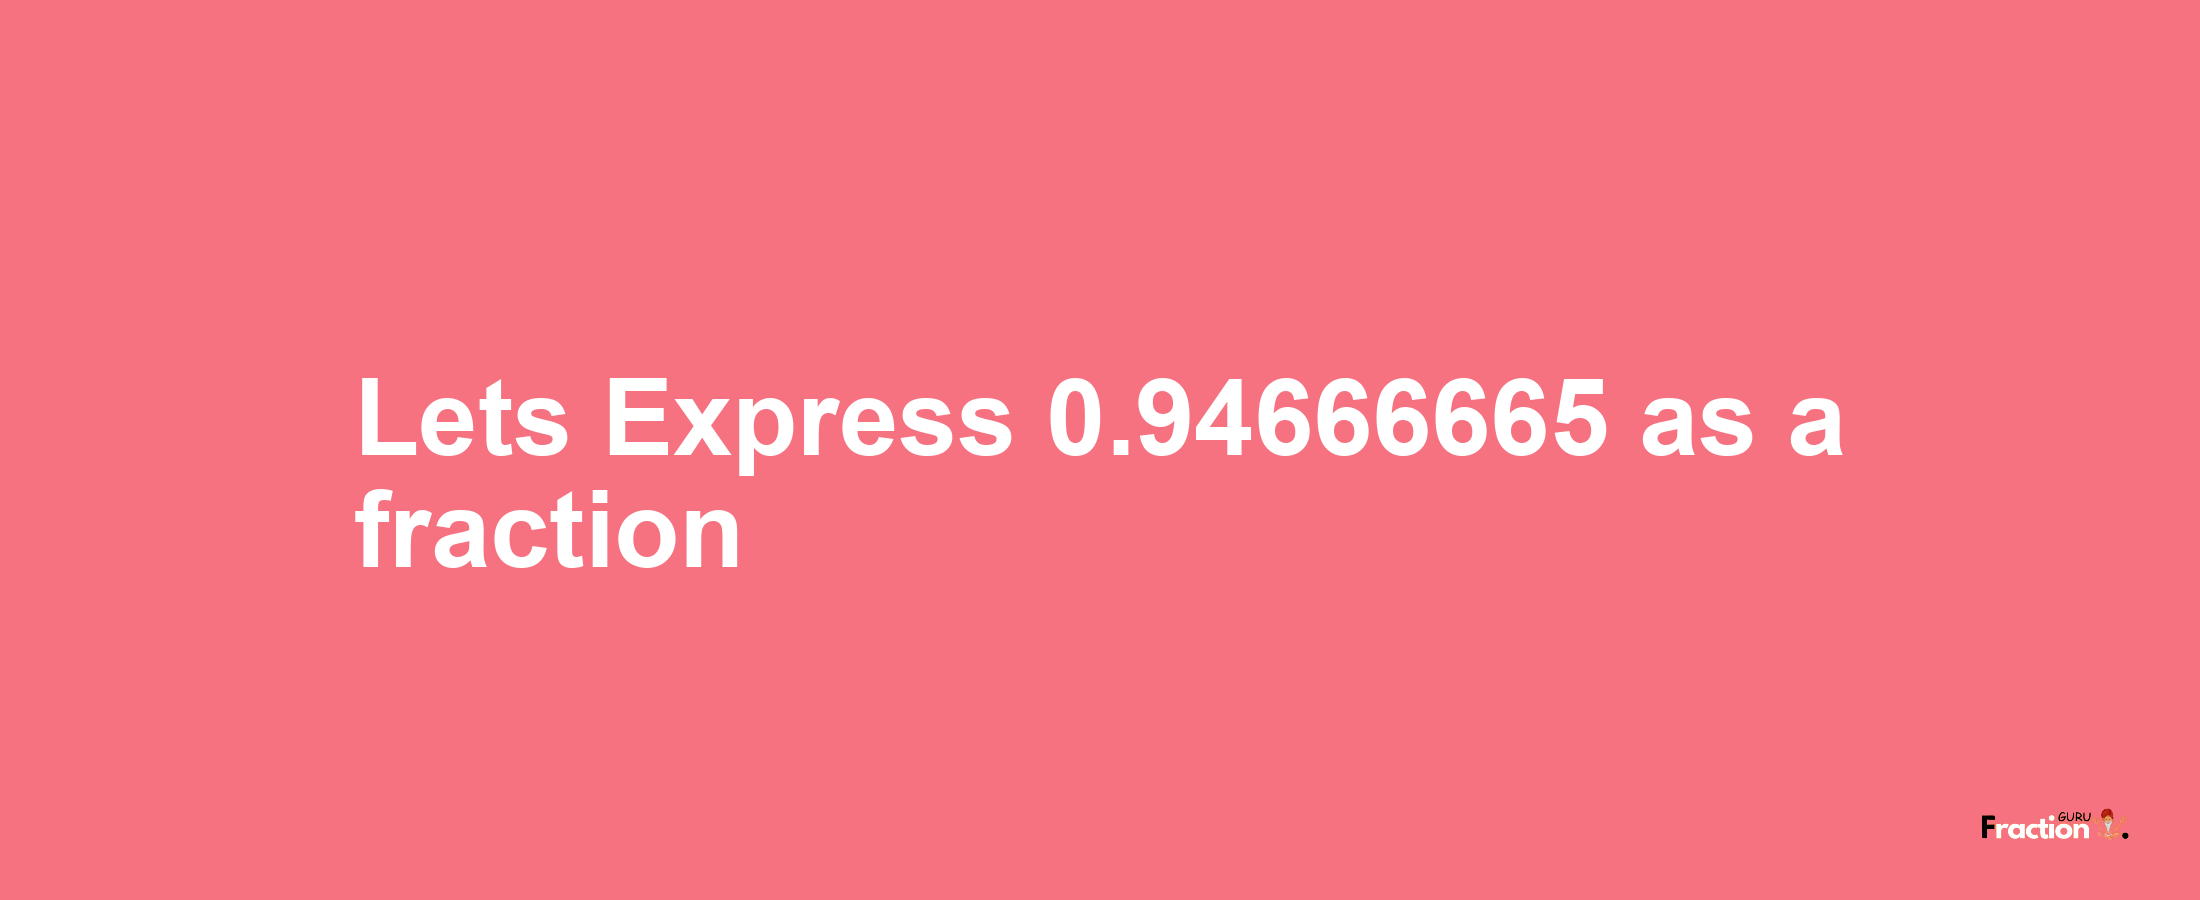 Lets Express 0.94666665 as afraction